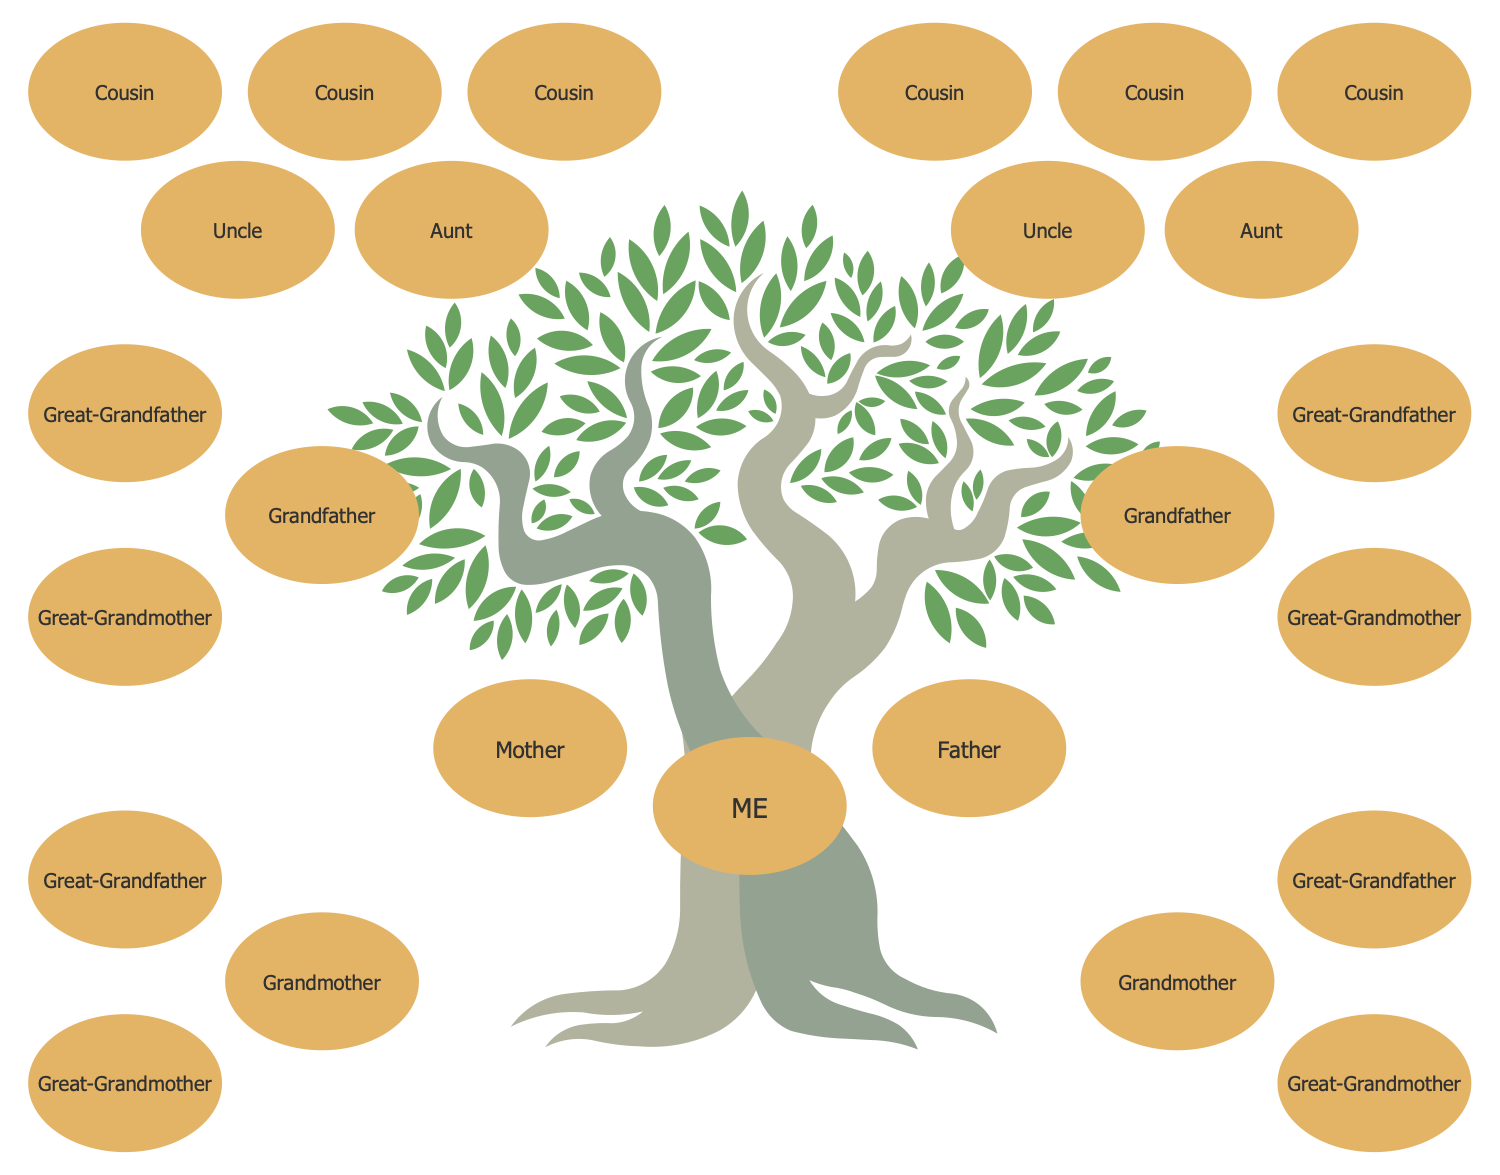 family tree template with siblings and cousins